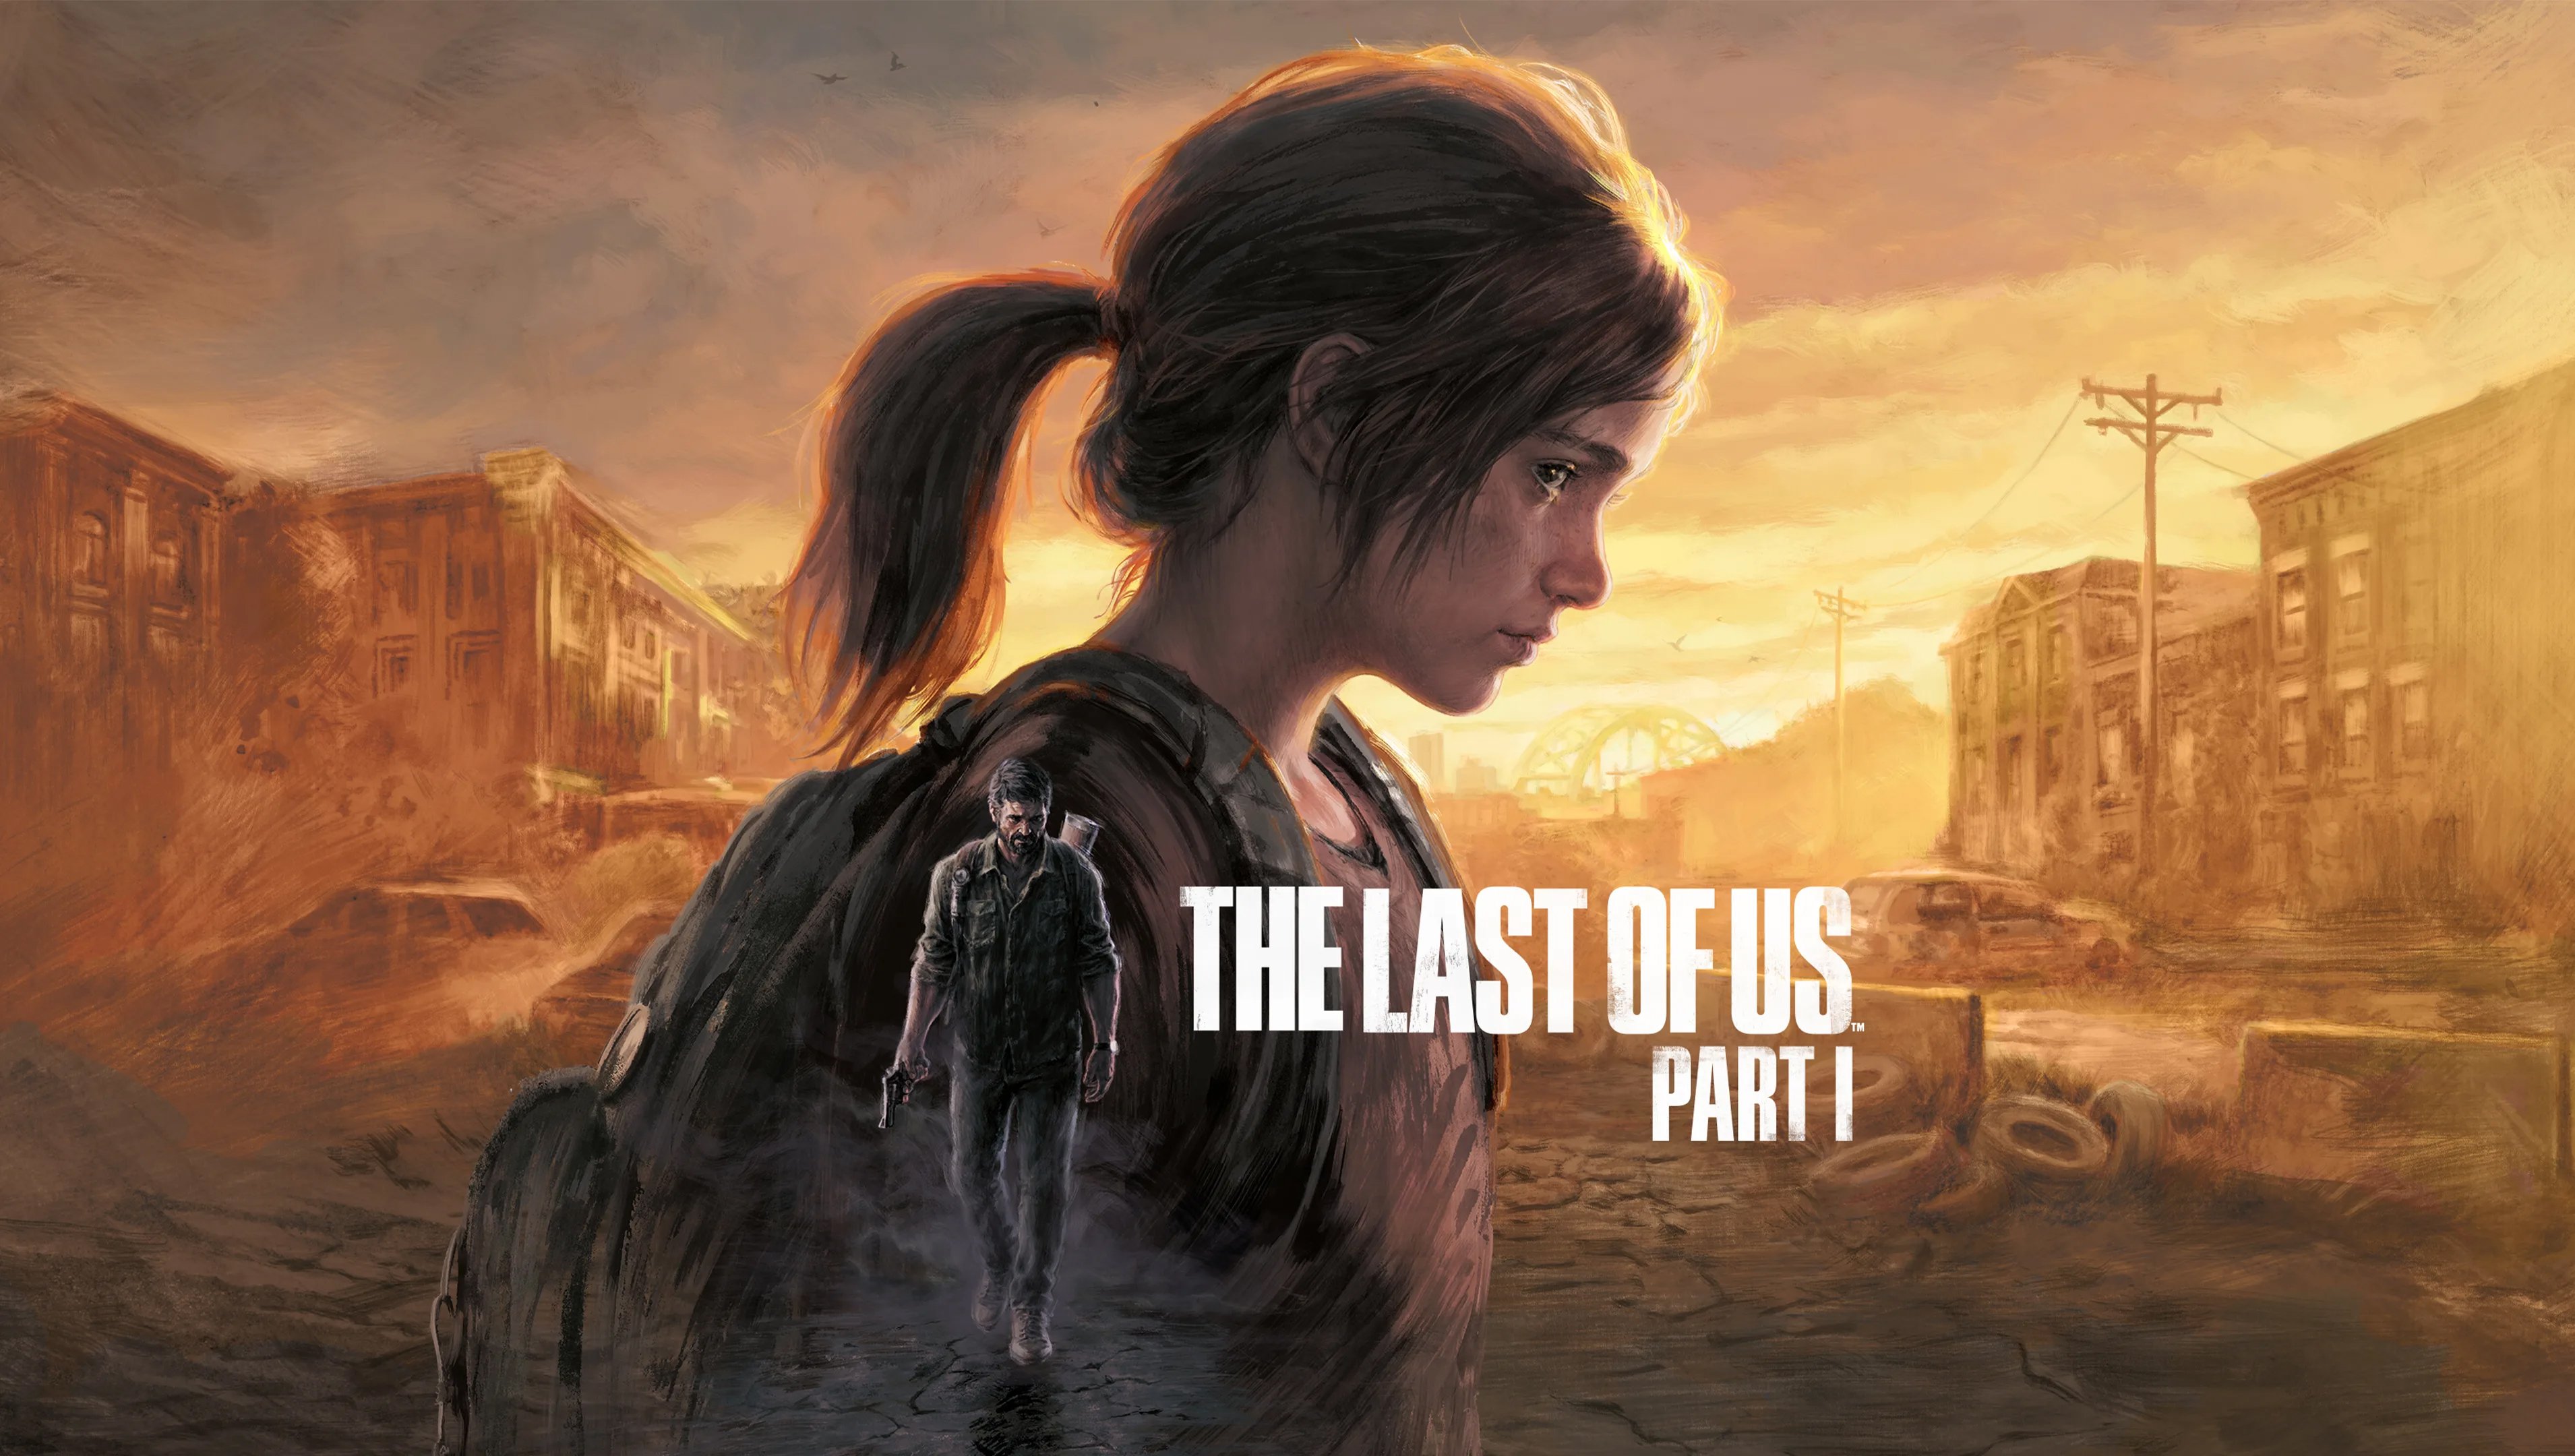 The Last of Us Part II Remastered for PS5? maybe we can get it after the  Remake of The Last of Us (The other 2 pictures are so bad but I really